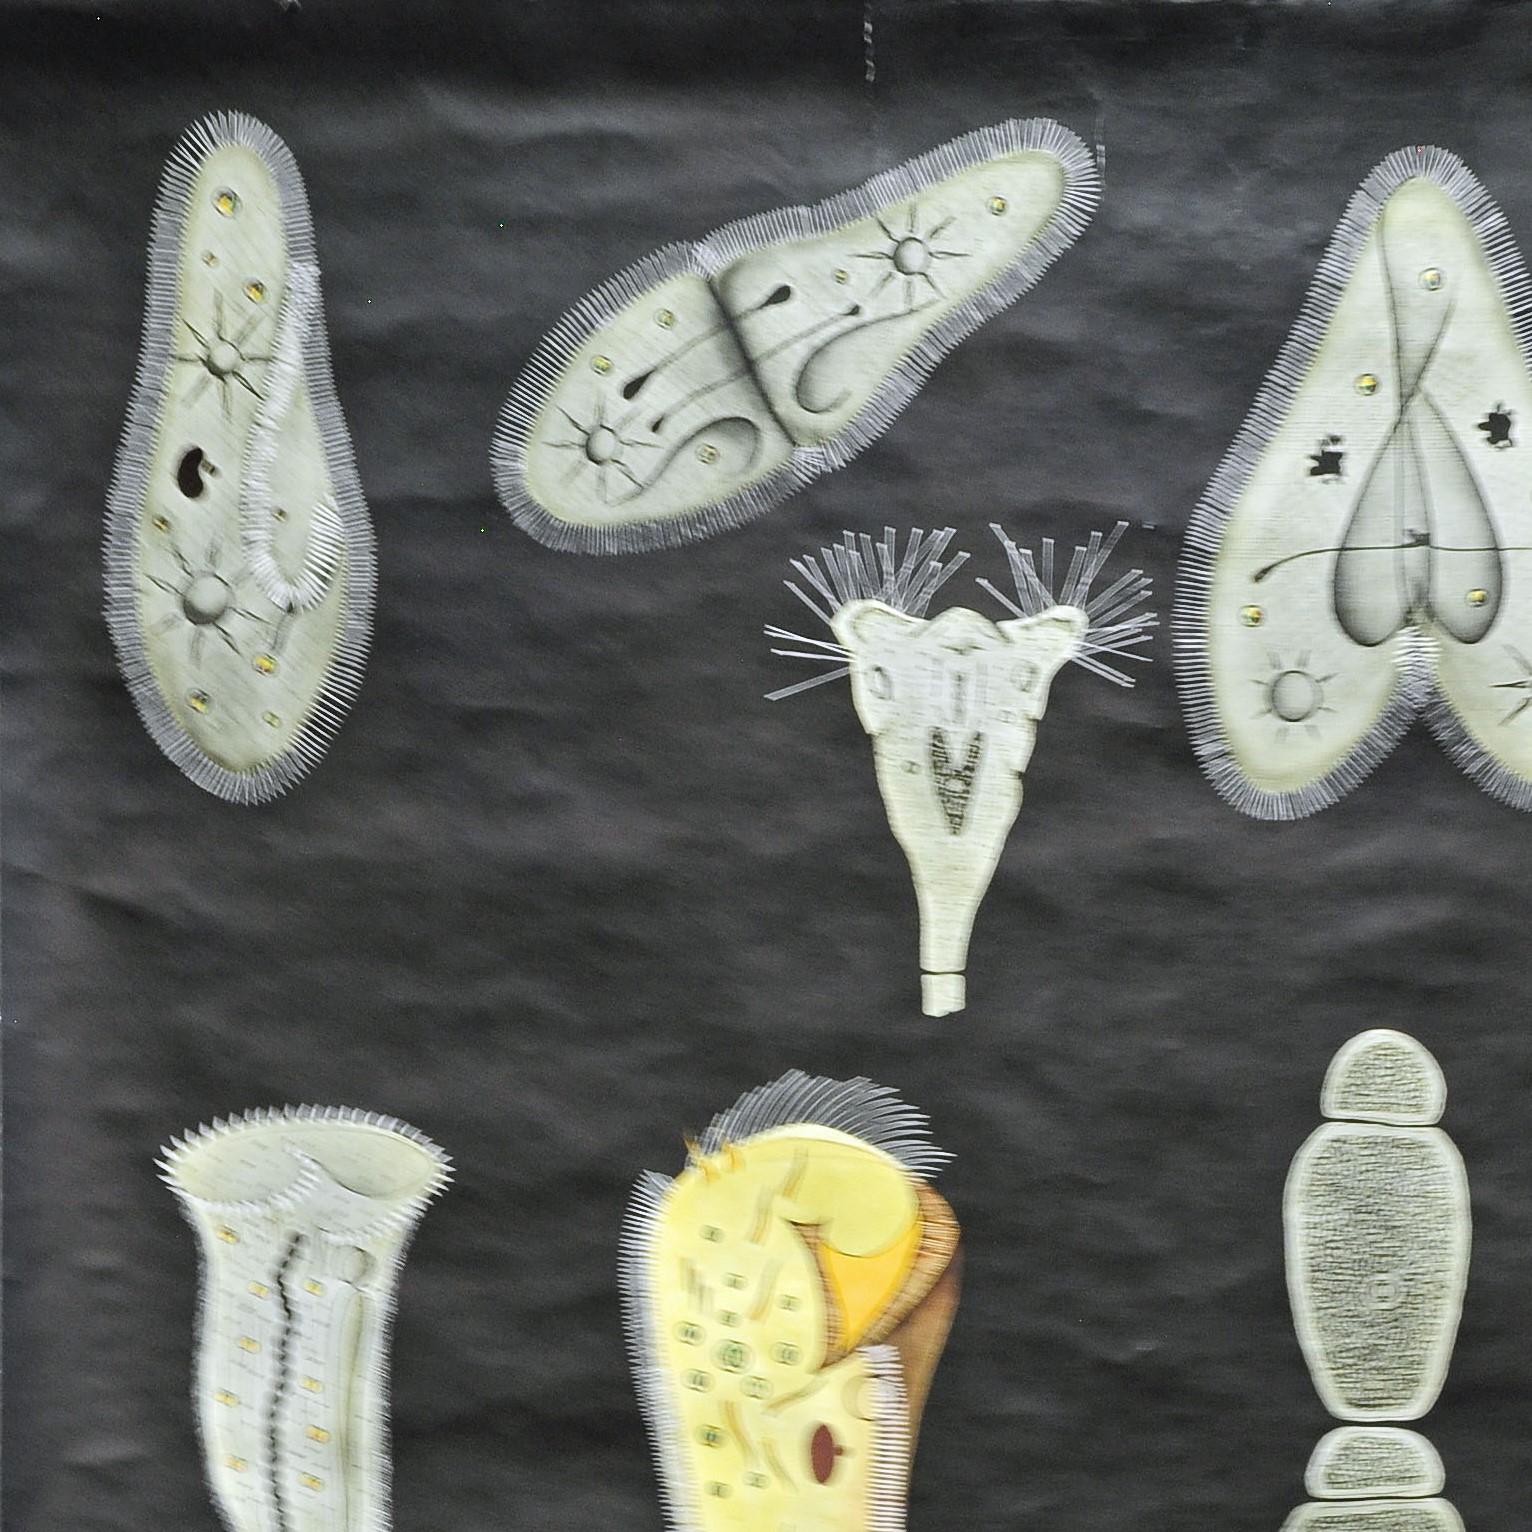 A fantastic dark black Jung Koch Quentell rollable wall chart depicting protozoa (part II), published by Hagemann Lehrmittelverlag Duesseldorf. Colorful print on paper reinforced with canvas, used as teaching material in German